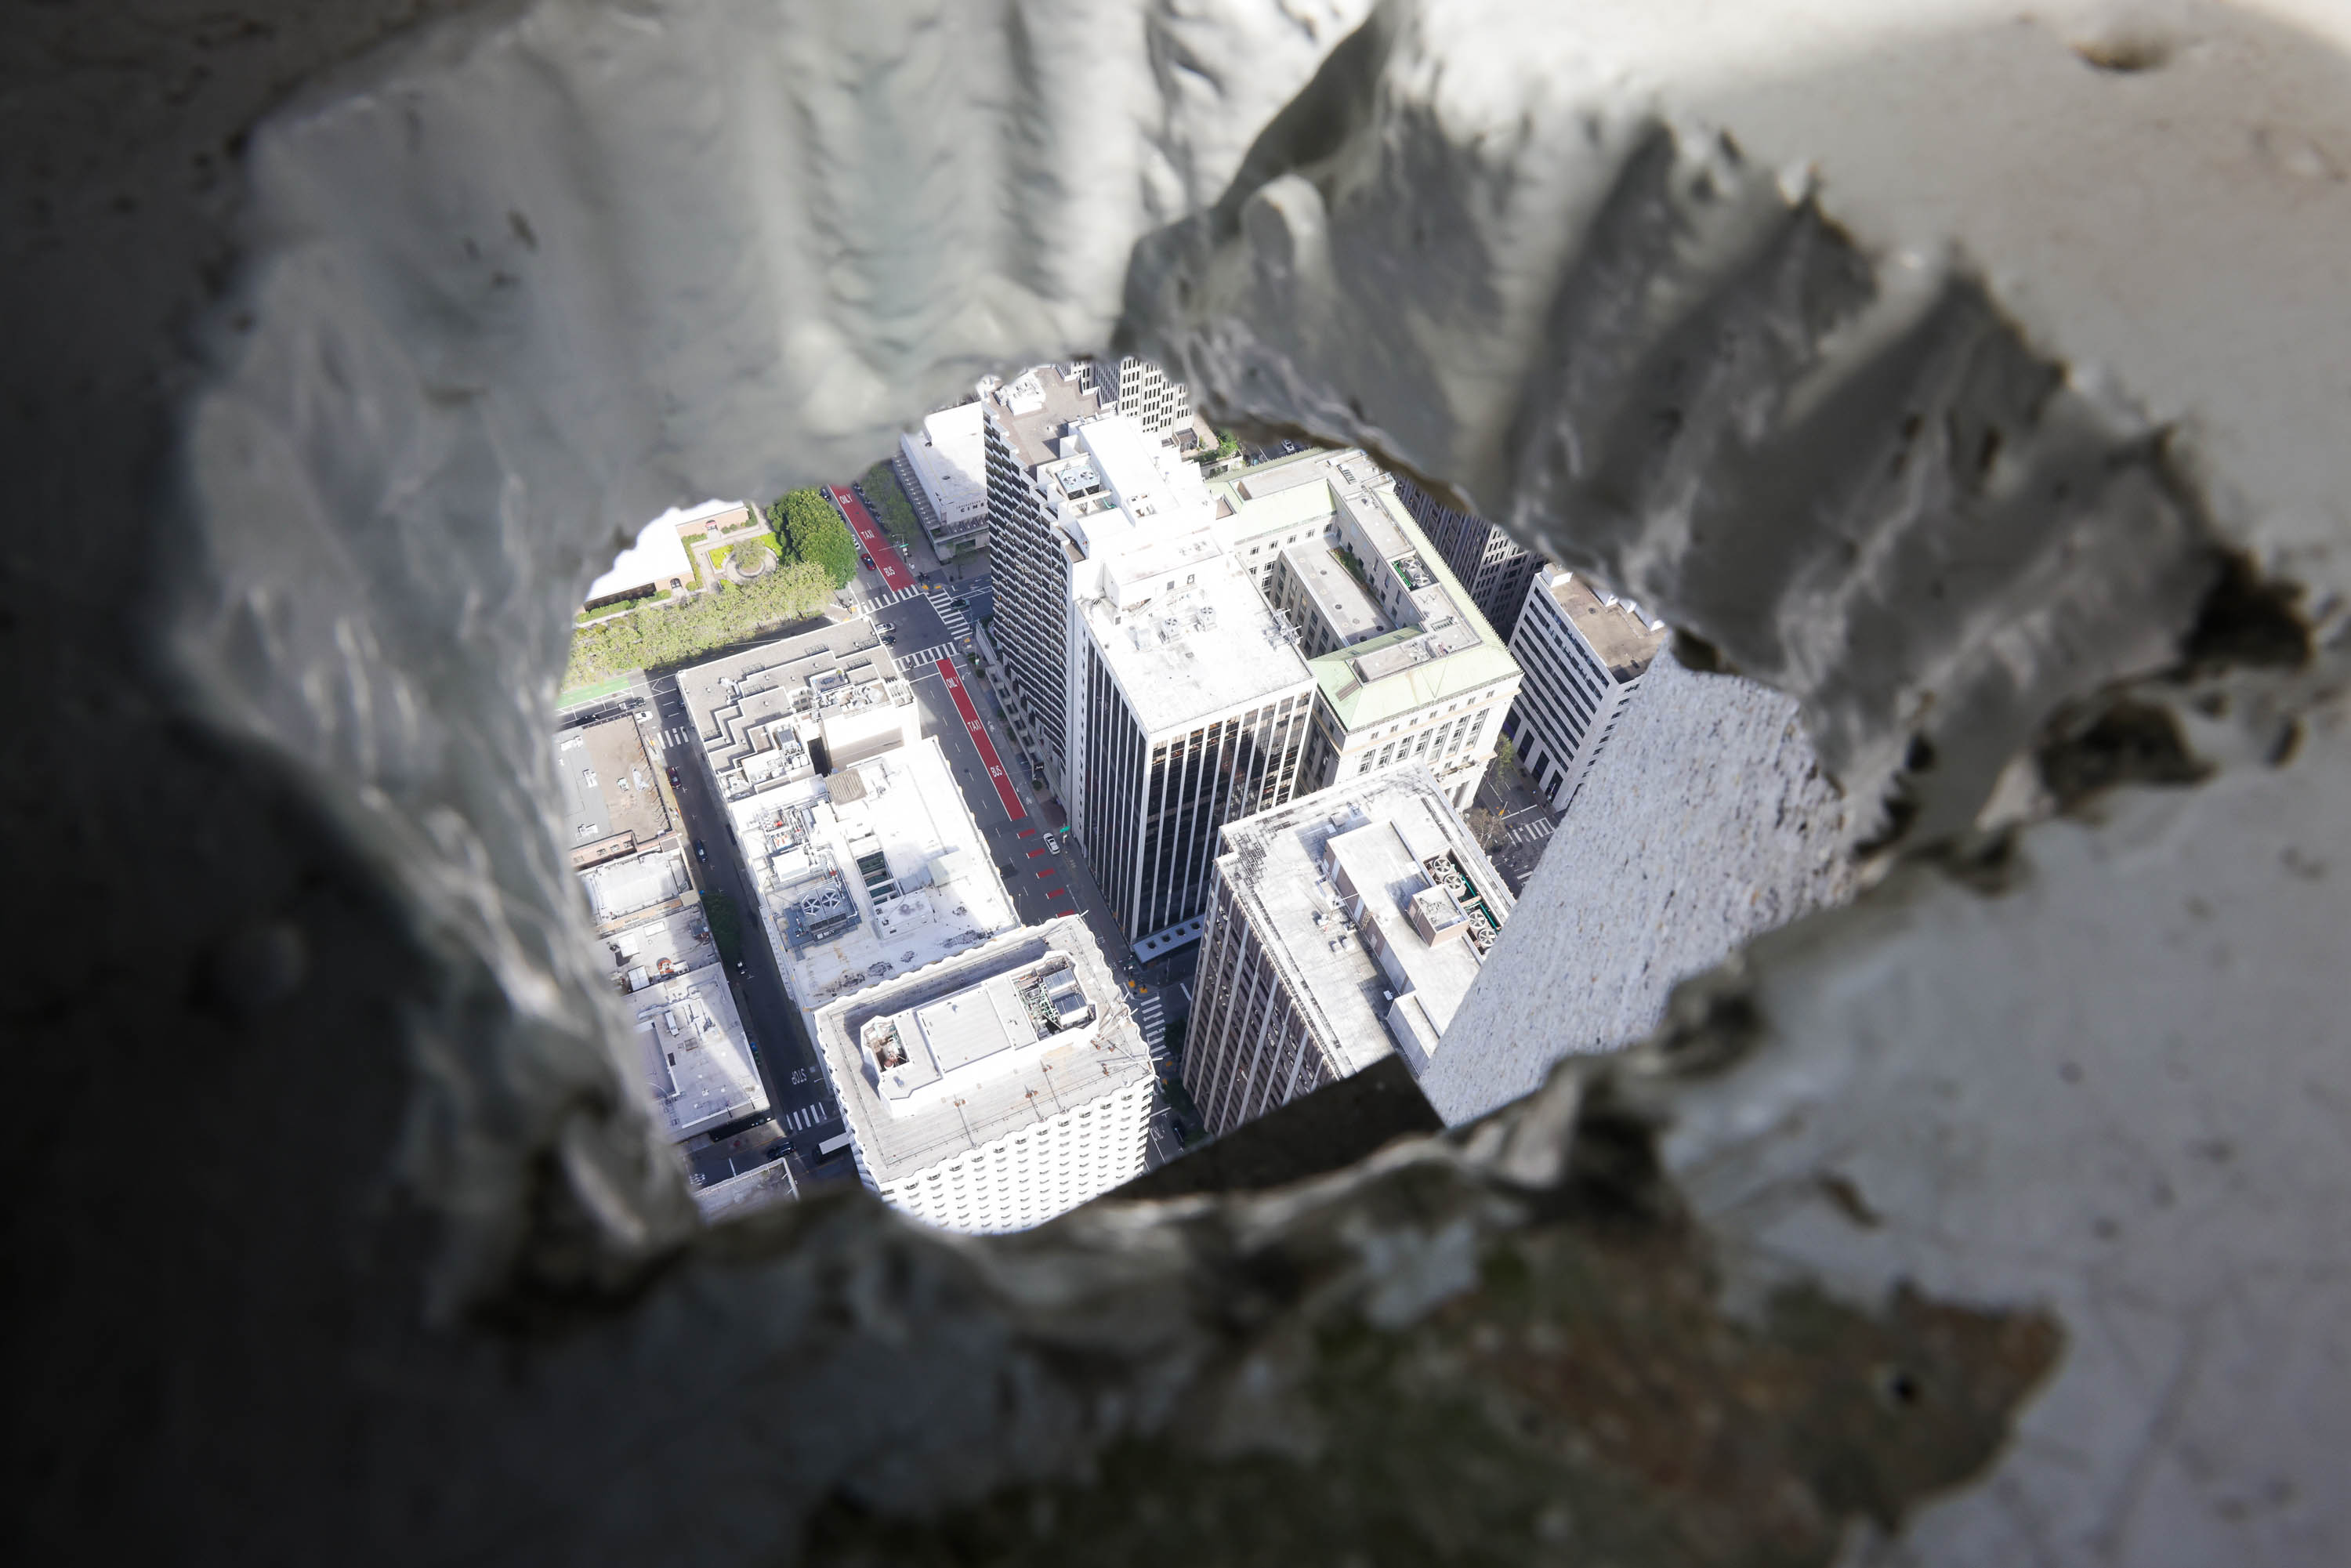 Aerial view of city buildings through a rough-edged hole in a structure.